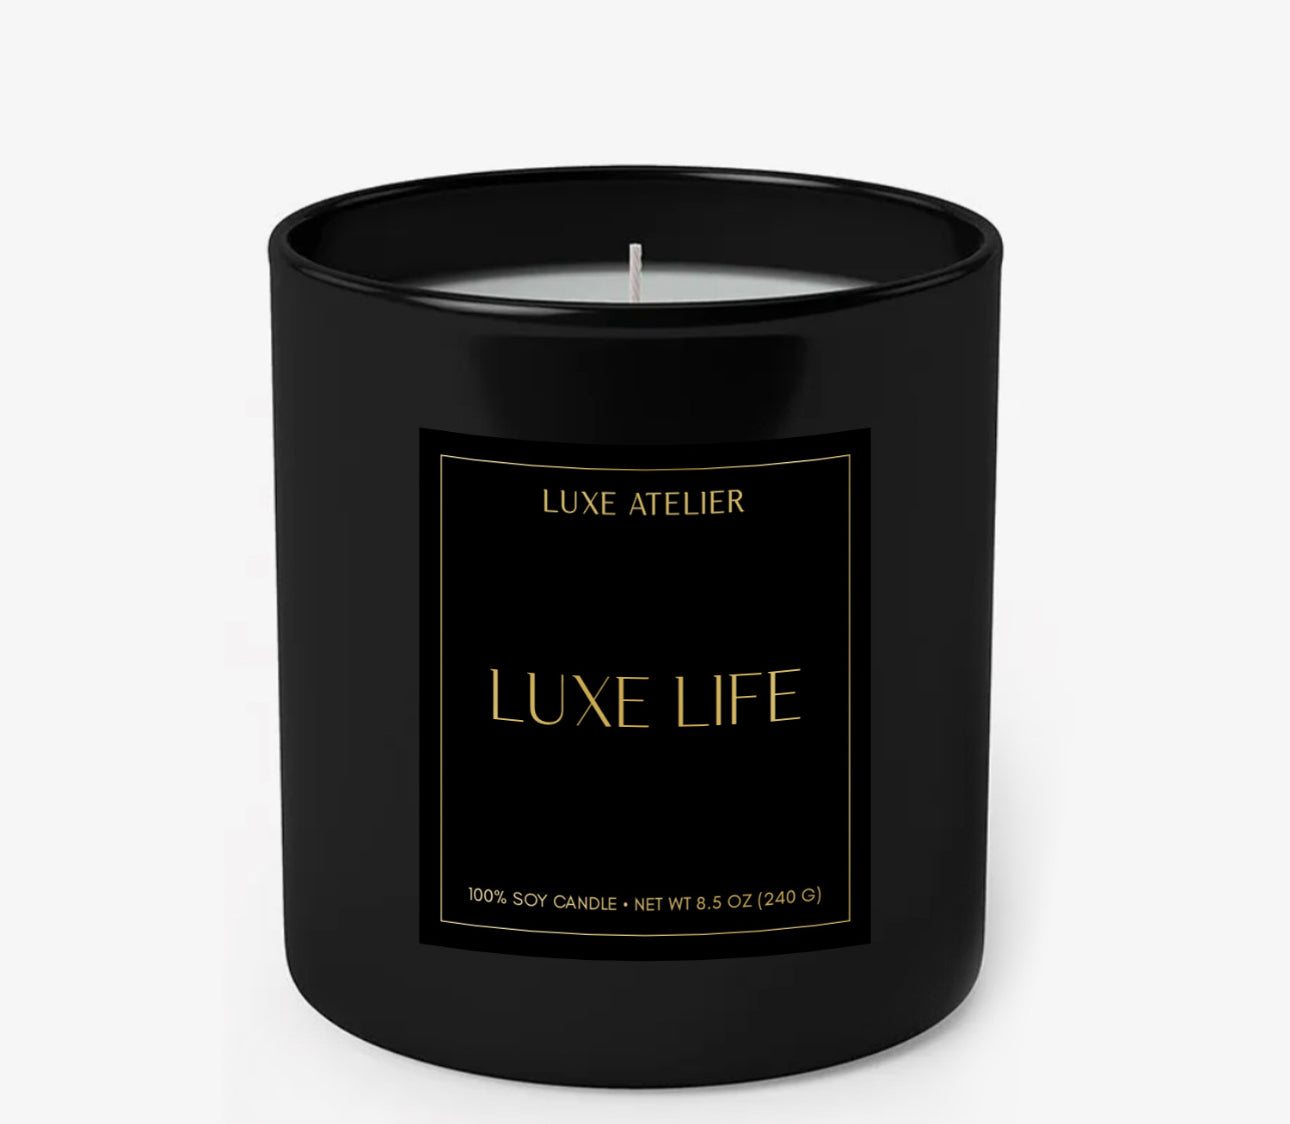 Luxe Atelier Candles